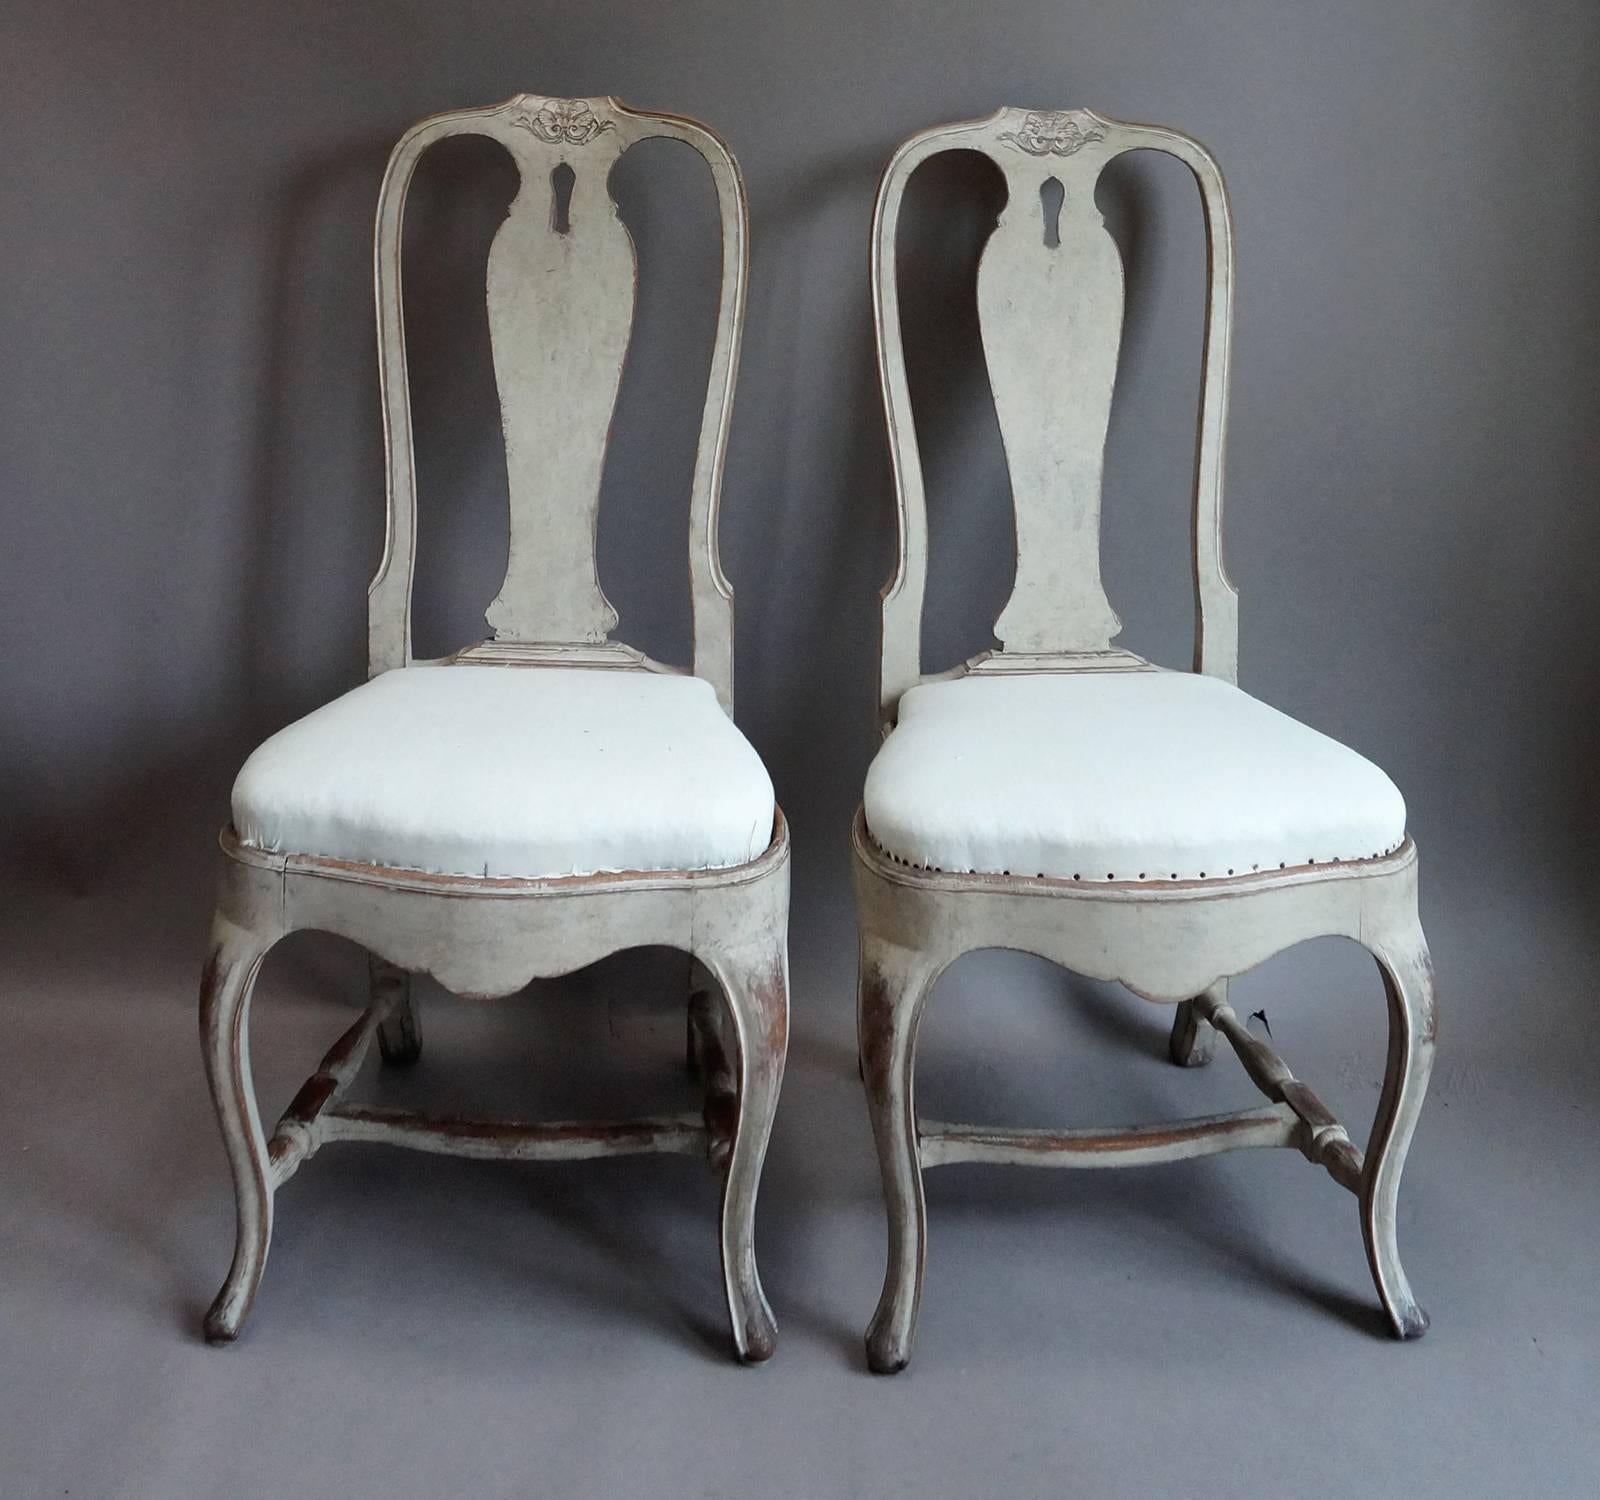 Set of four Swedish dining chairs, circa 1900, from the old Hotell Höjden in the islands east of Stockholm. Rococo style with cabriole legs, pierced splats with carved detail, slip seats and H-shaped stretchers.